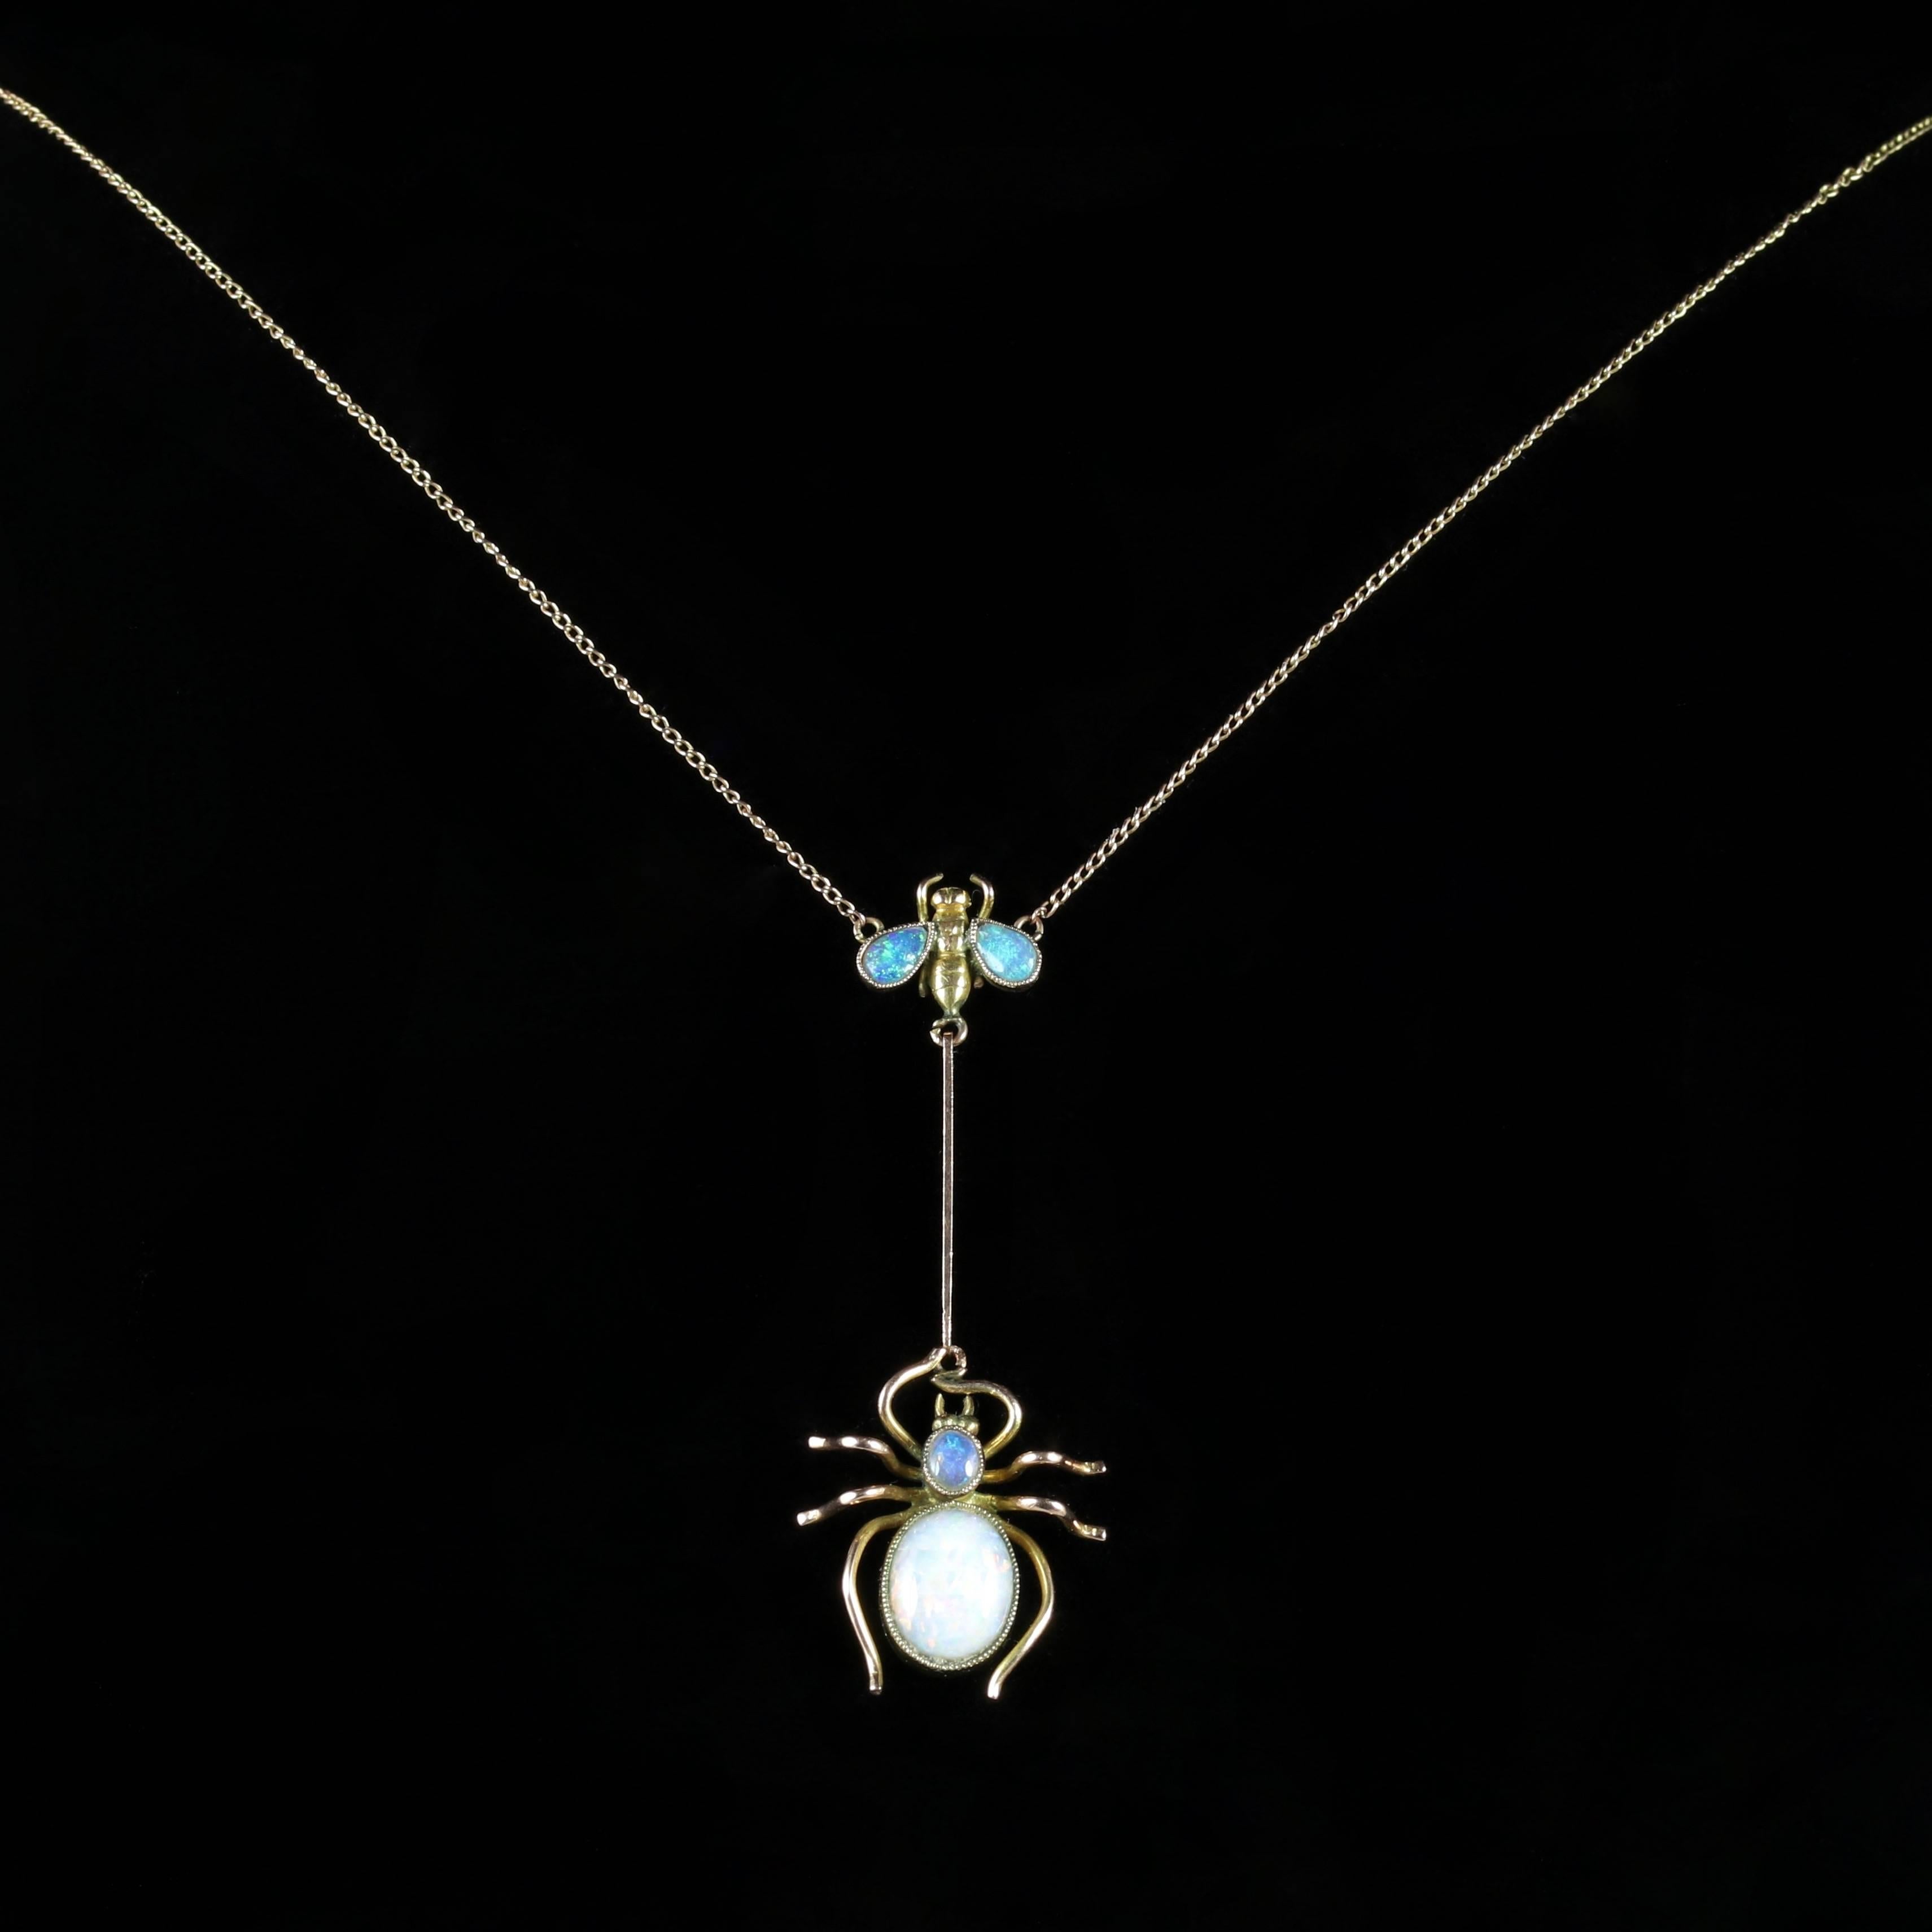 Women's Antique Victorian Opal Spider Fly Necklace, circa 1900